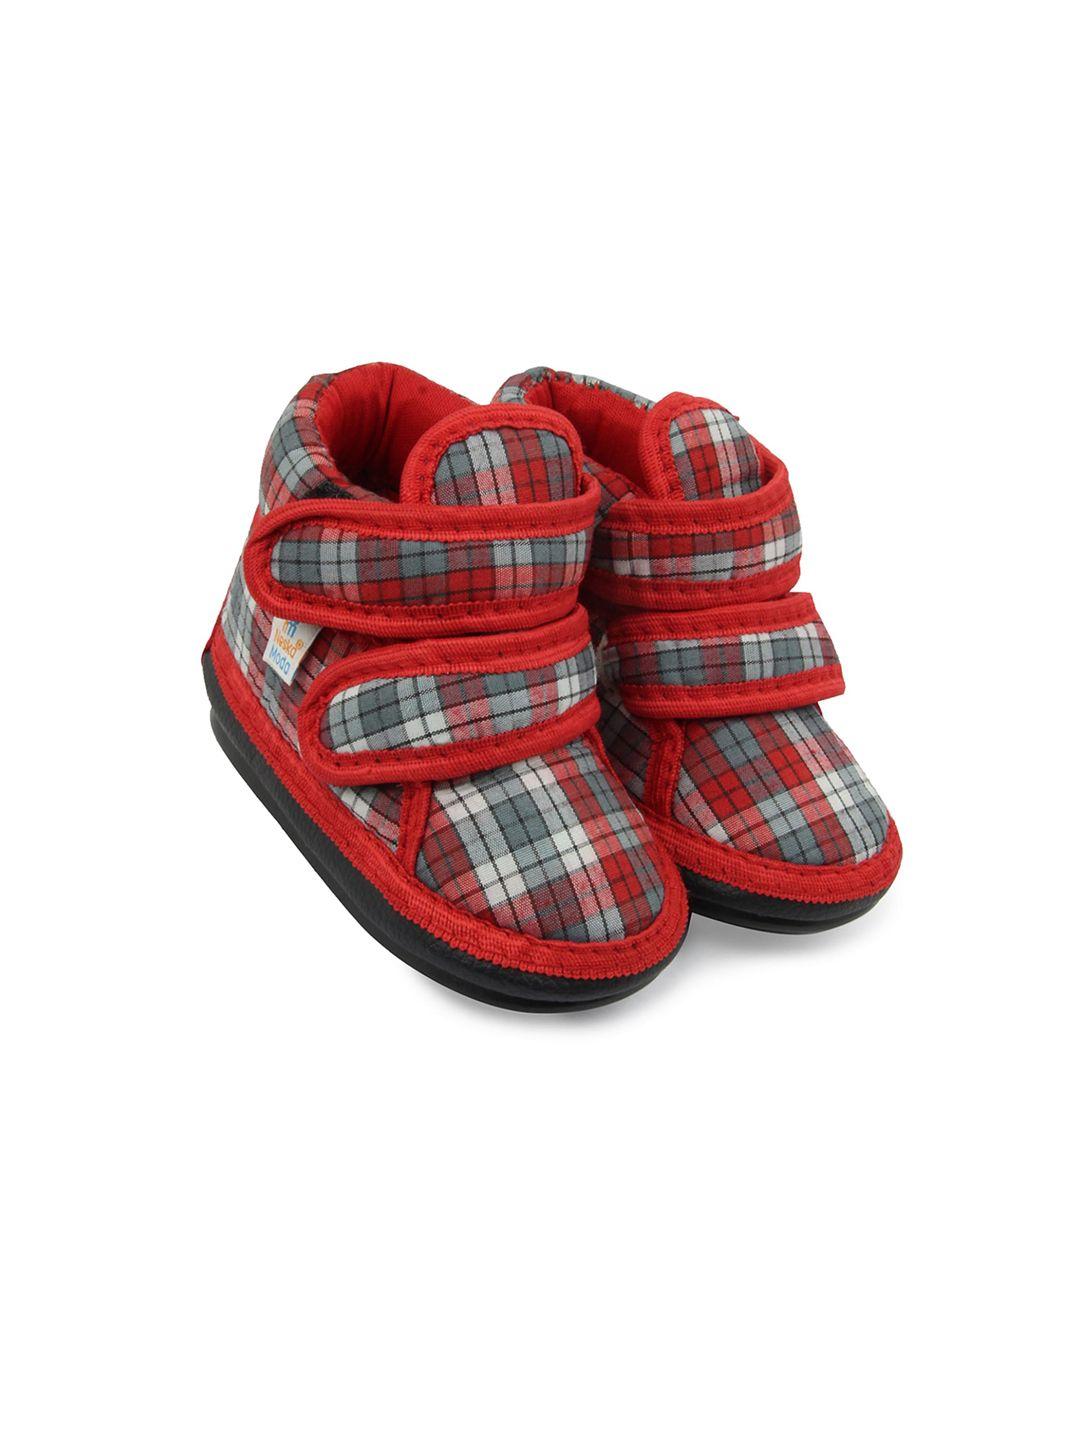 baesd infant boys checked cotton musical booties